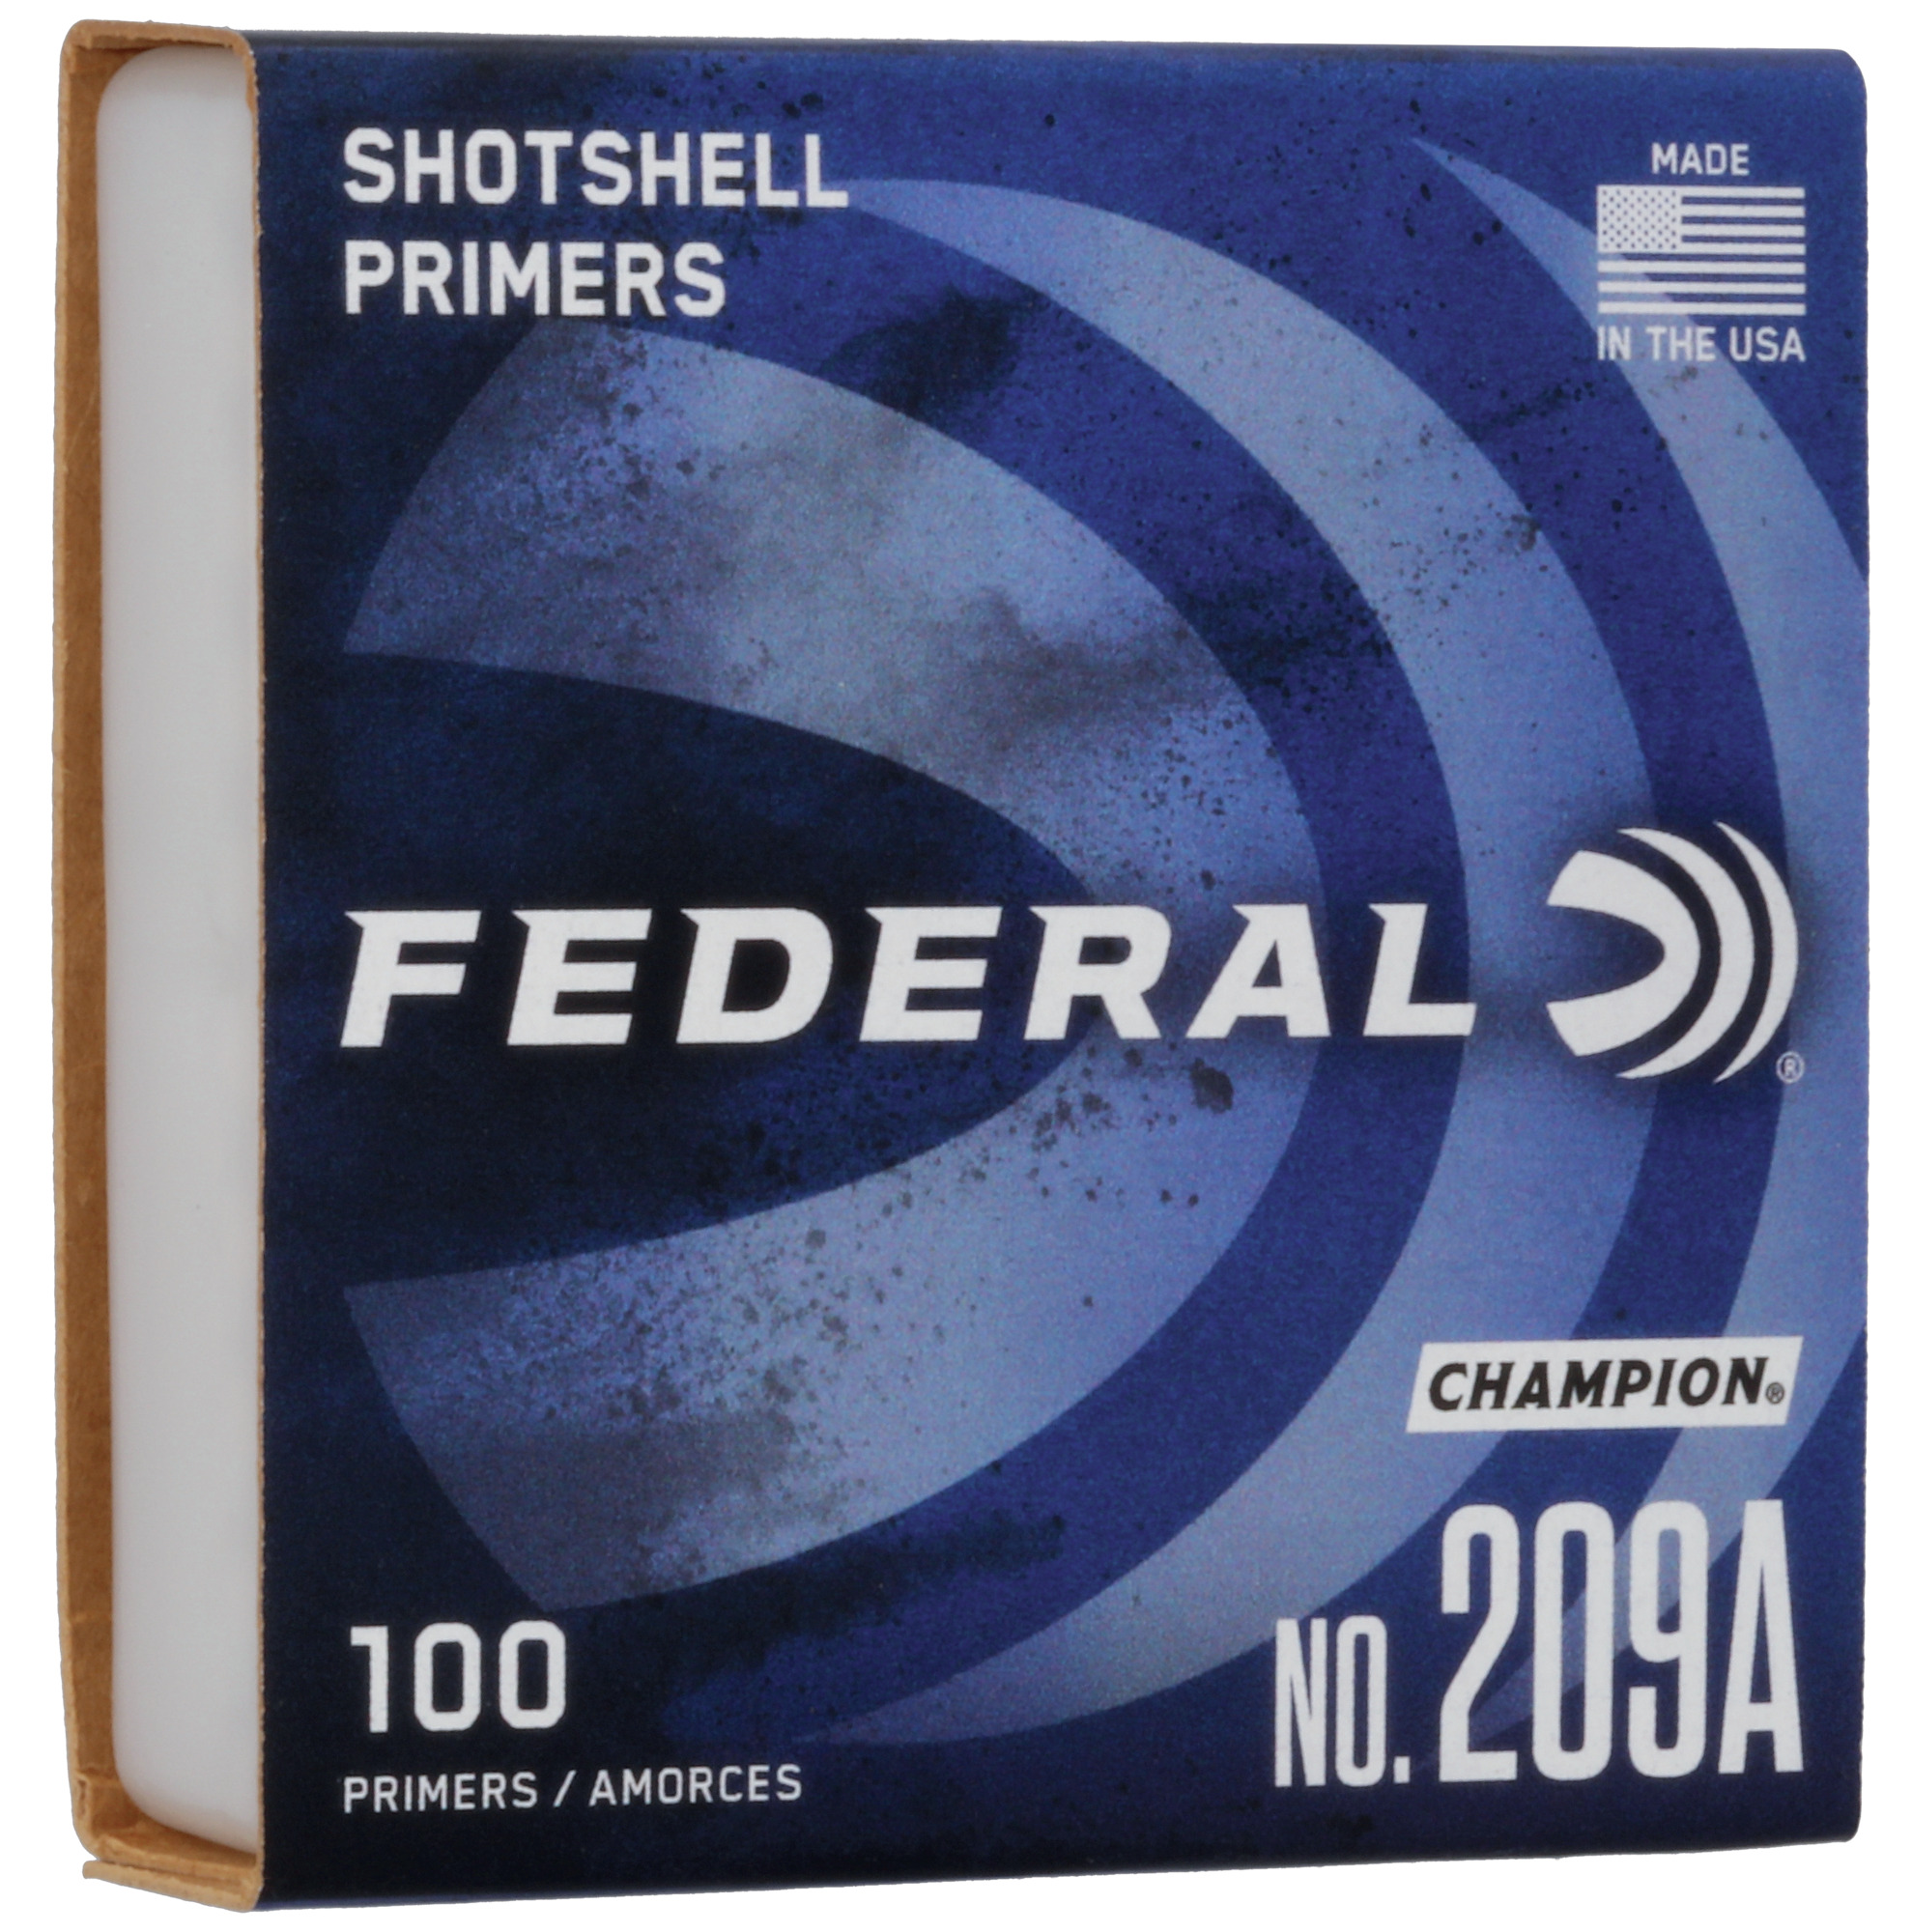 Buy Federal 209a Primers in stock | BUY NOW!